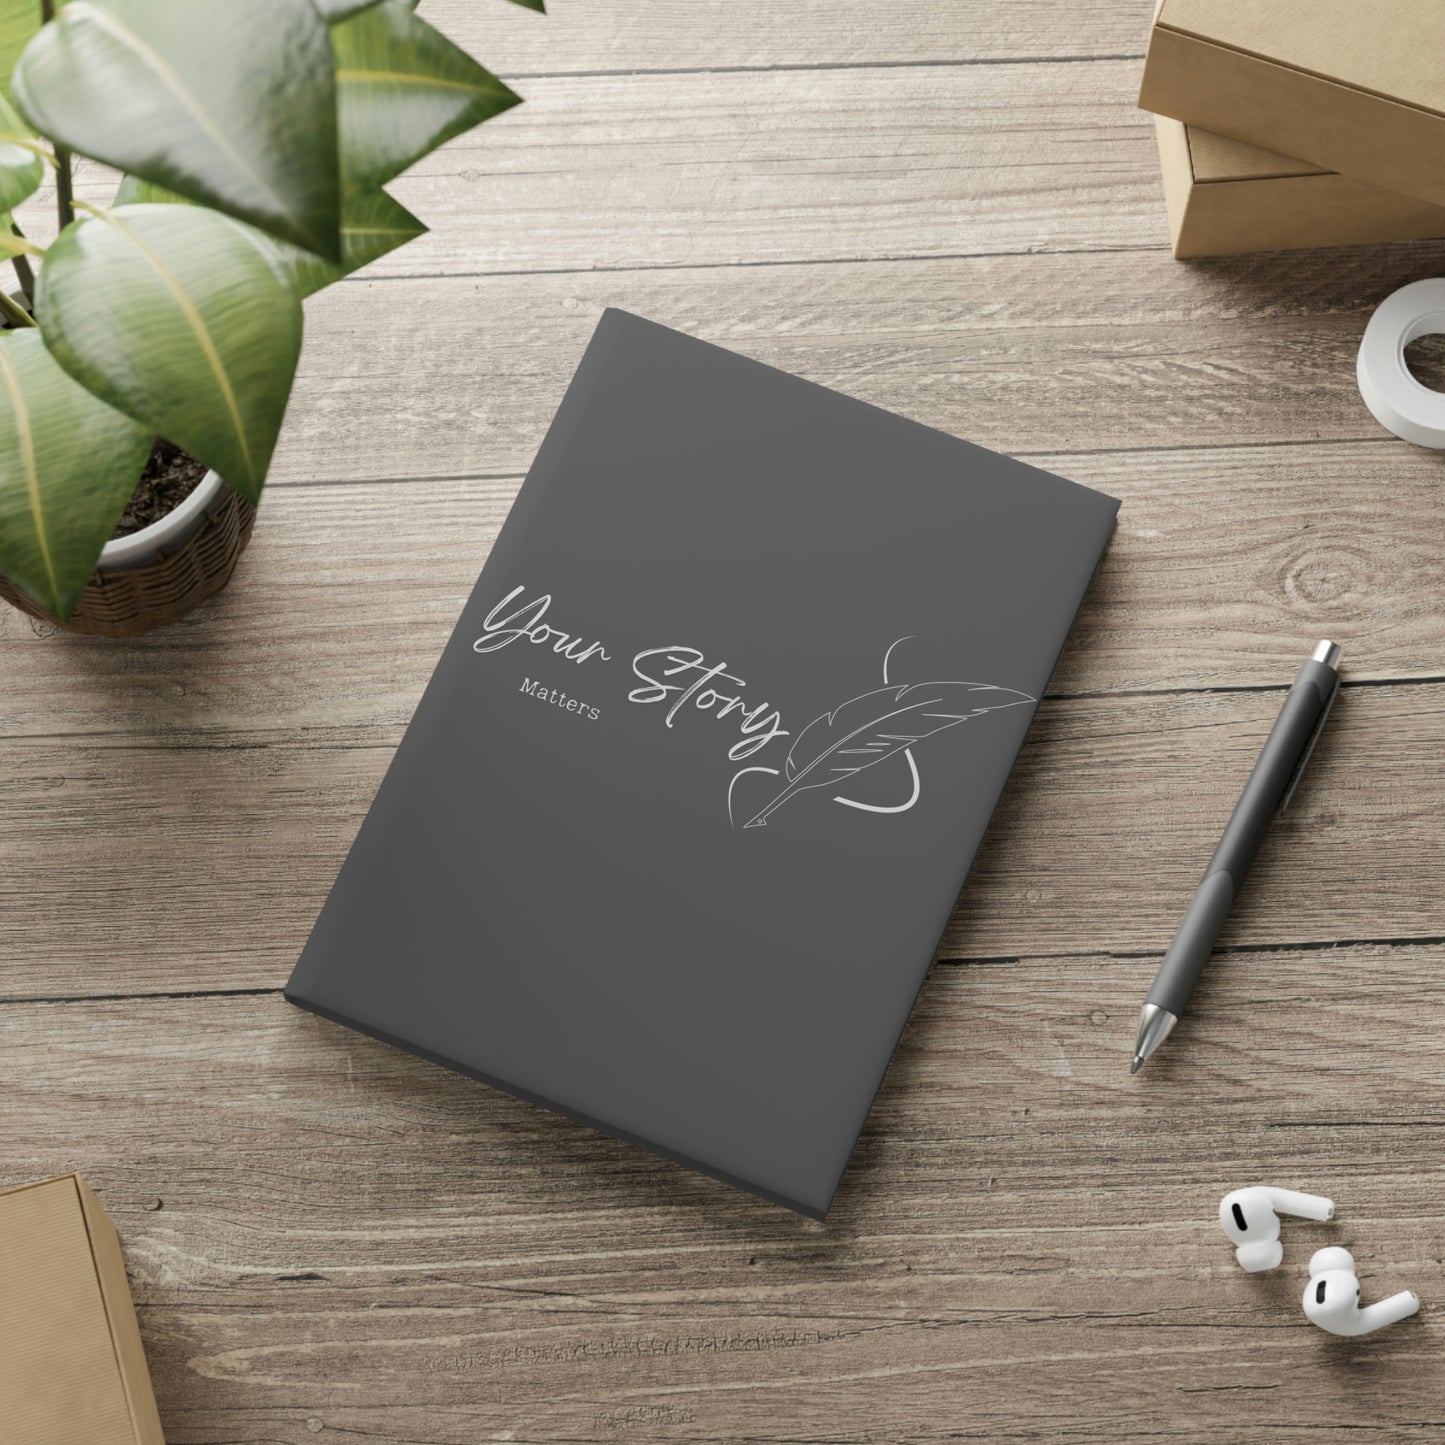 Your Story Matters // Write Out Loud // Hardcover Notebook with Puffy Covers (Gray)